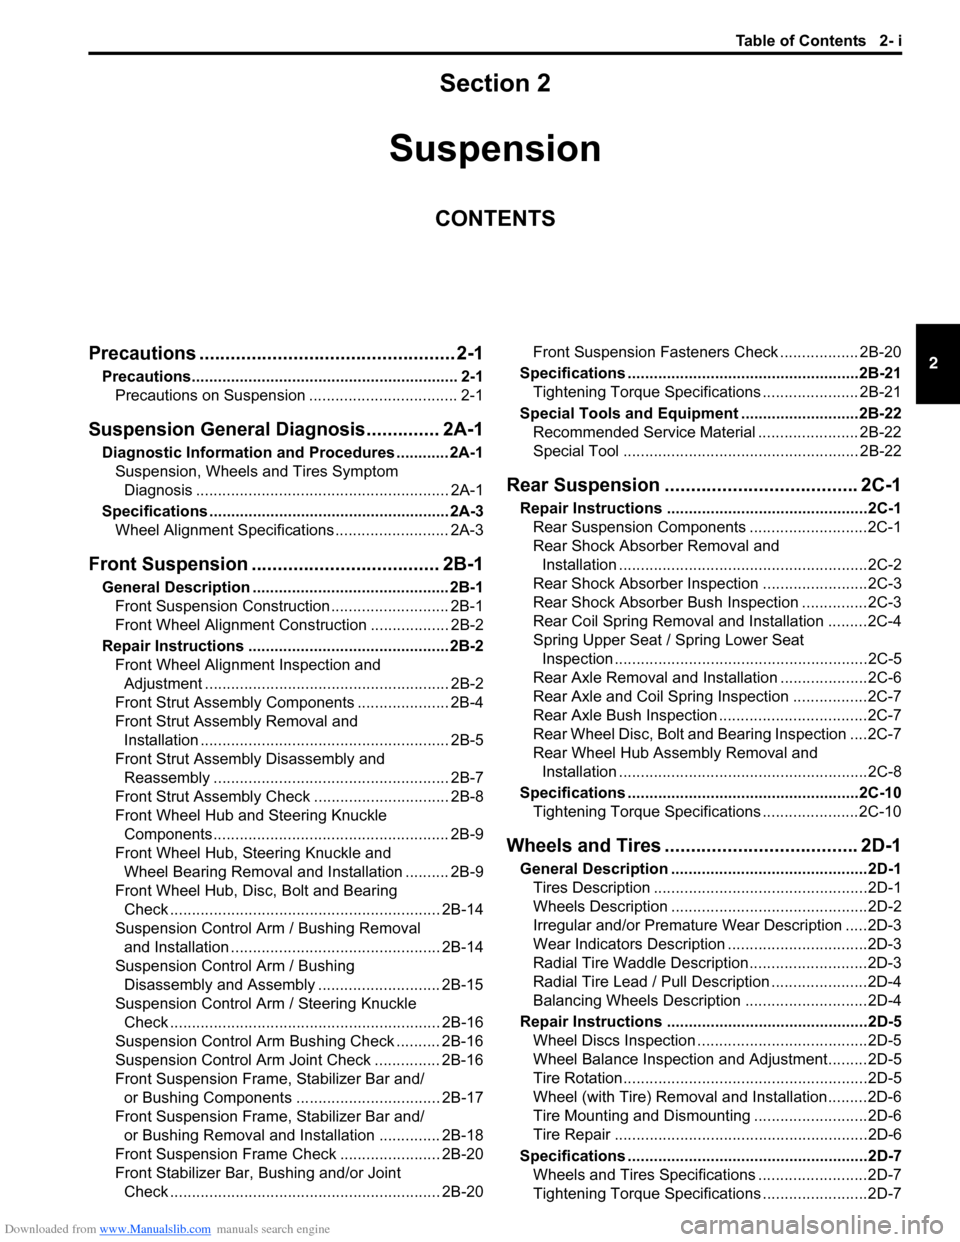 SUZUKI SX4 2006 1.G Service Workshop Manual Downloaded from www.Manualslib.com manuals search engine Table of Contents 2- i
2
Section 2
CONTENTS
Suspension
Precautions ................................................. 2-1
Precautions...........